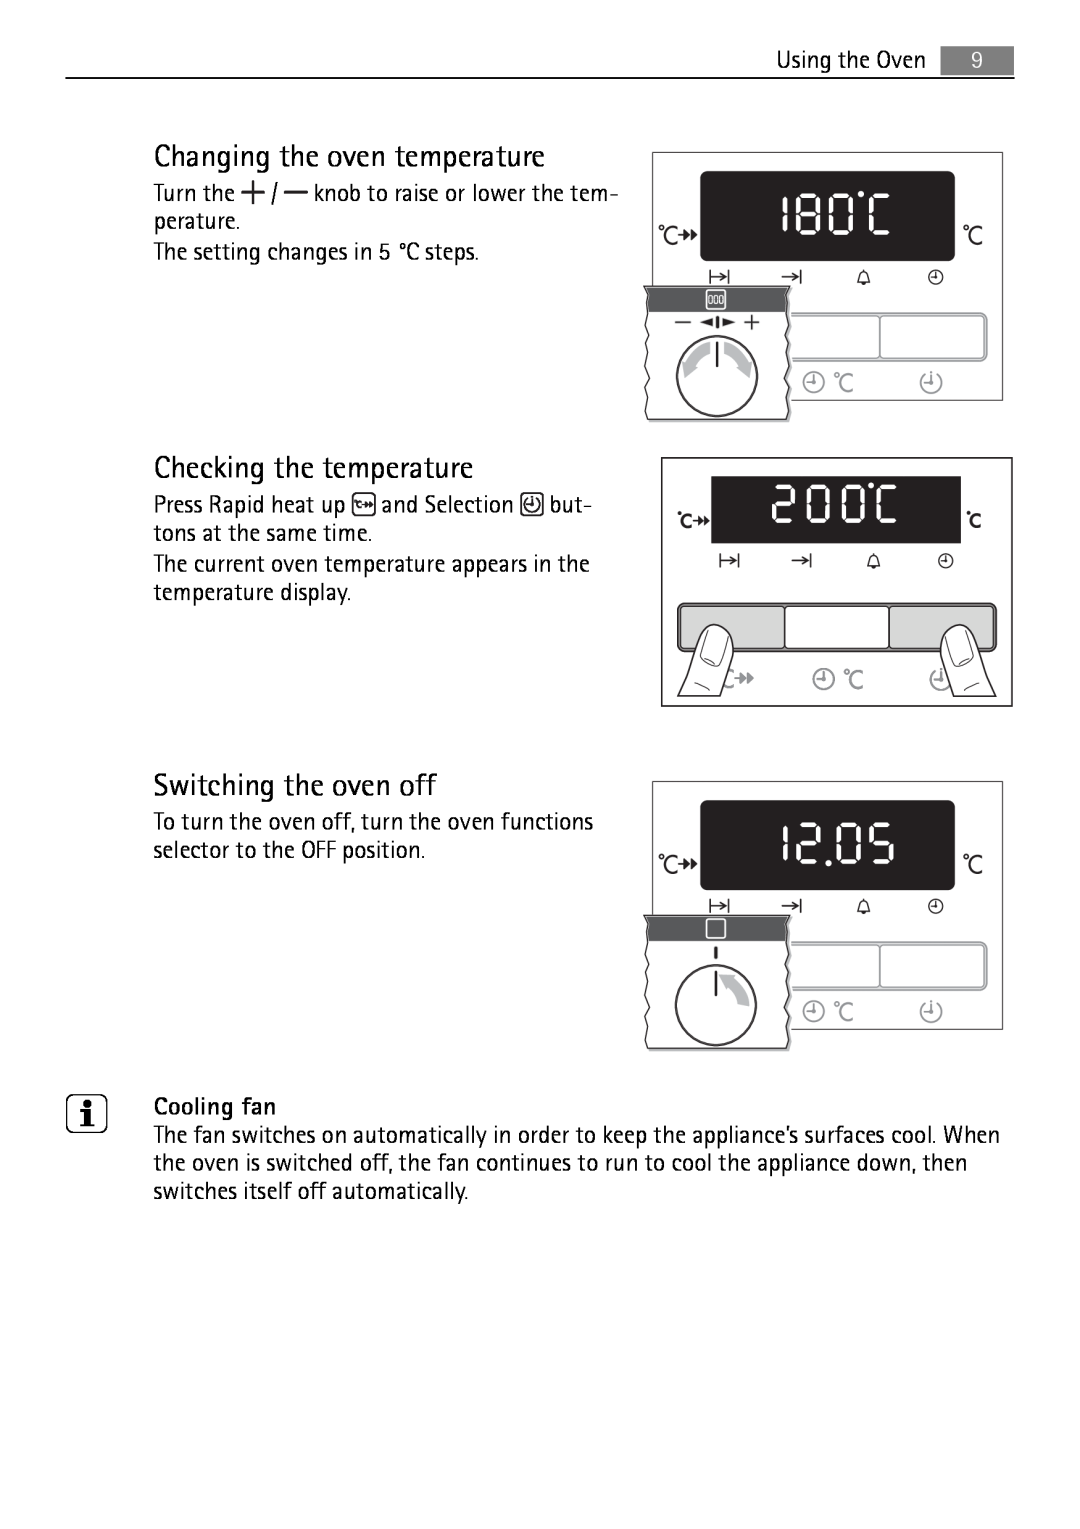 Electrolux B3741-5 user manual Changing the oven temperature, Checking the temperature, Switching the oven off, Cooling fan 